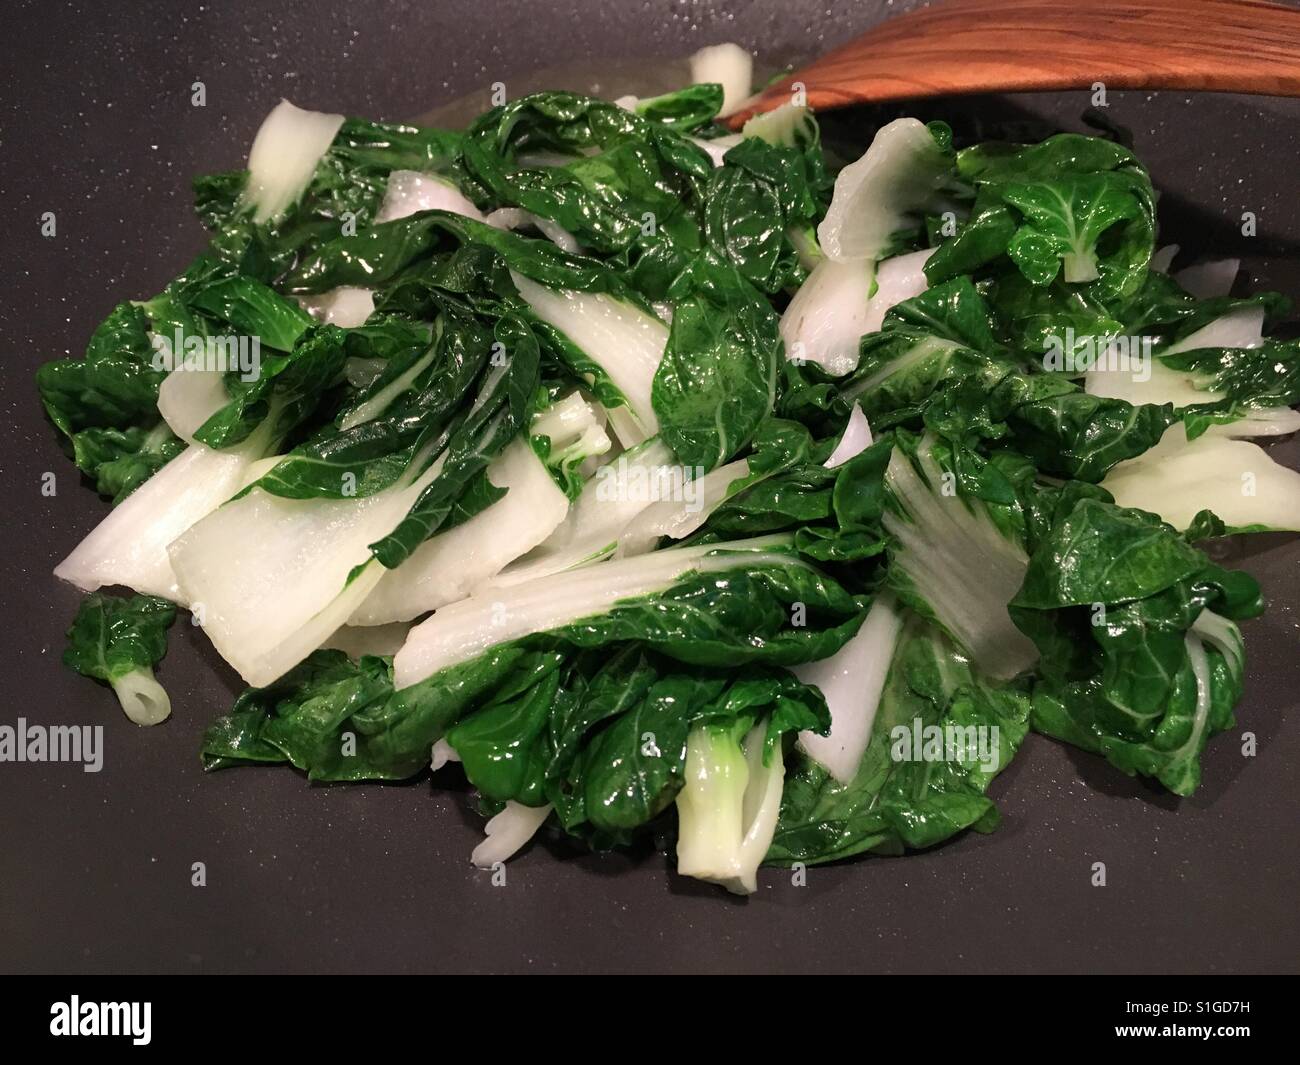 Home cooking bok choy vegetable Stock Photo